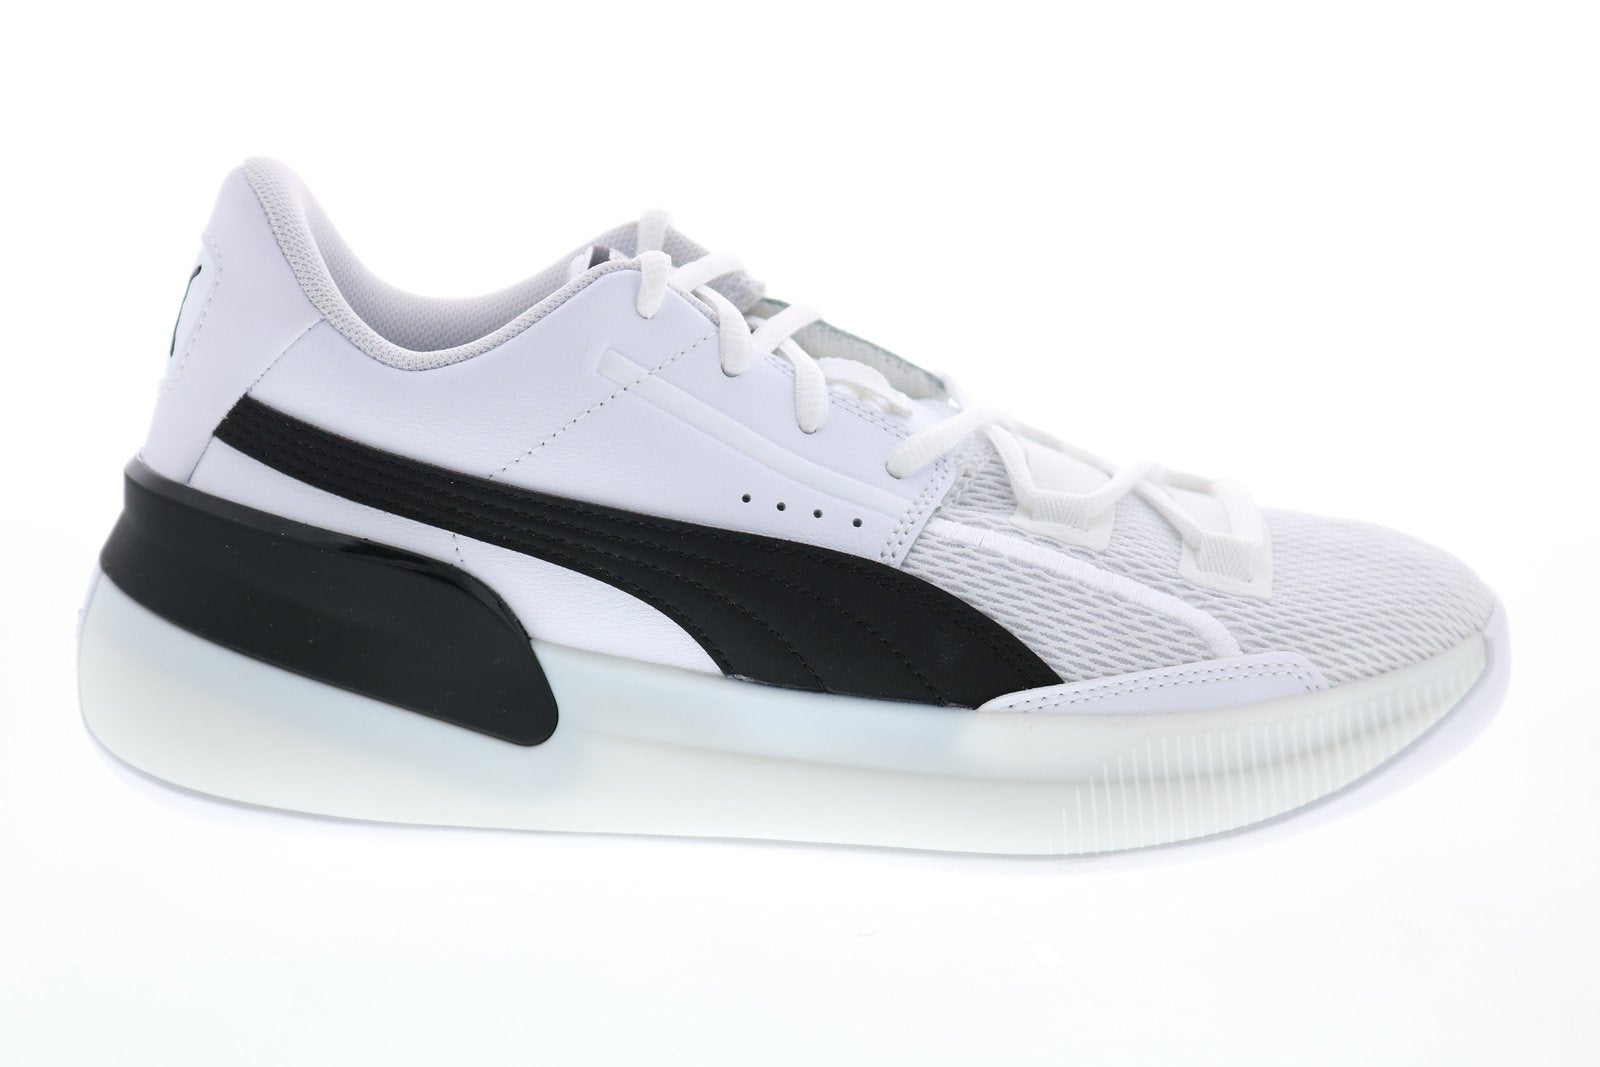 Puma Clyde Hardwood Team 19445401 Mens White Athletic Basketball Shoes ...